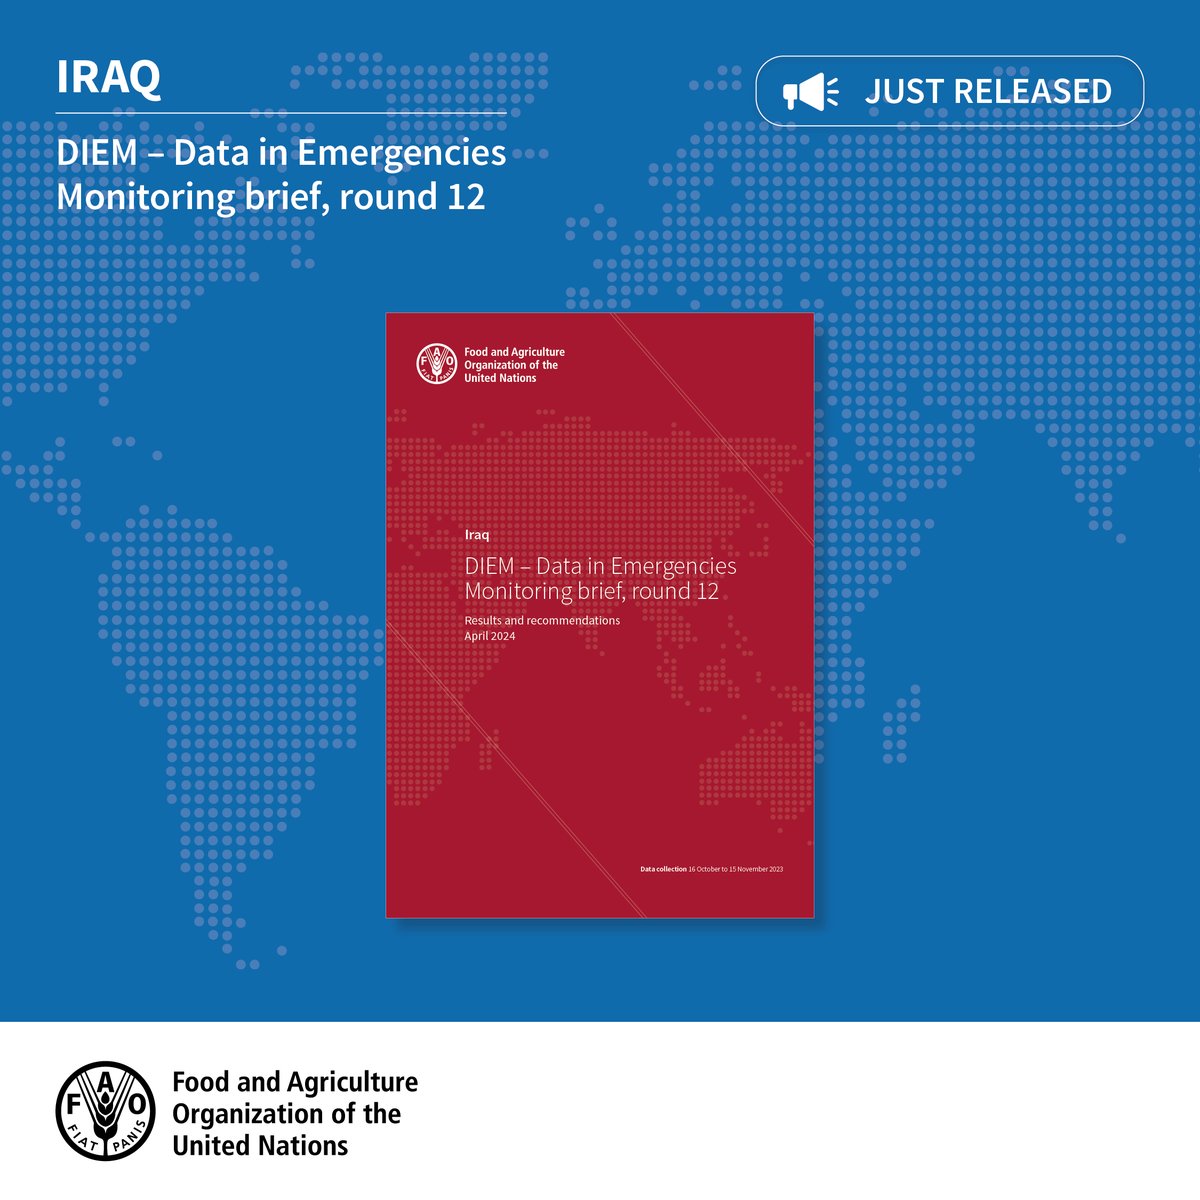 Thanks to funding from @USAIDSavesLives, results from round 12 of the @FAO #DataInEmergencies household monitoring survey in Iraq have been released.

Learn more about the impacts of shocks on livelihoods and #FoodSecurity here 👉 bit.ly/49KdCq7

#InvestInHumanity